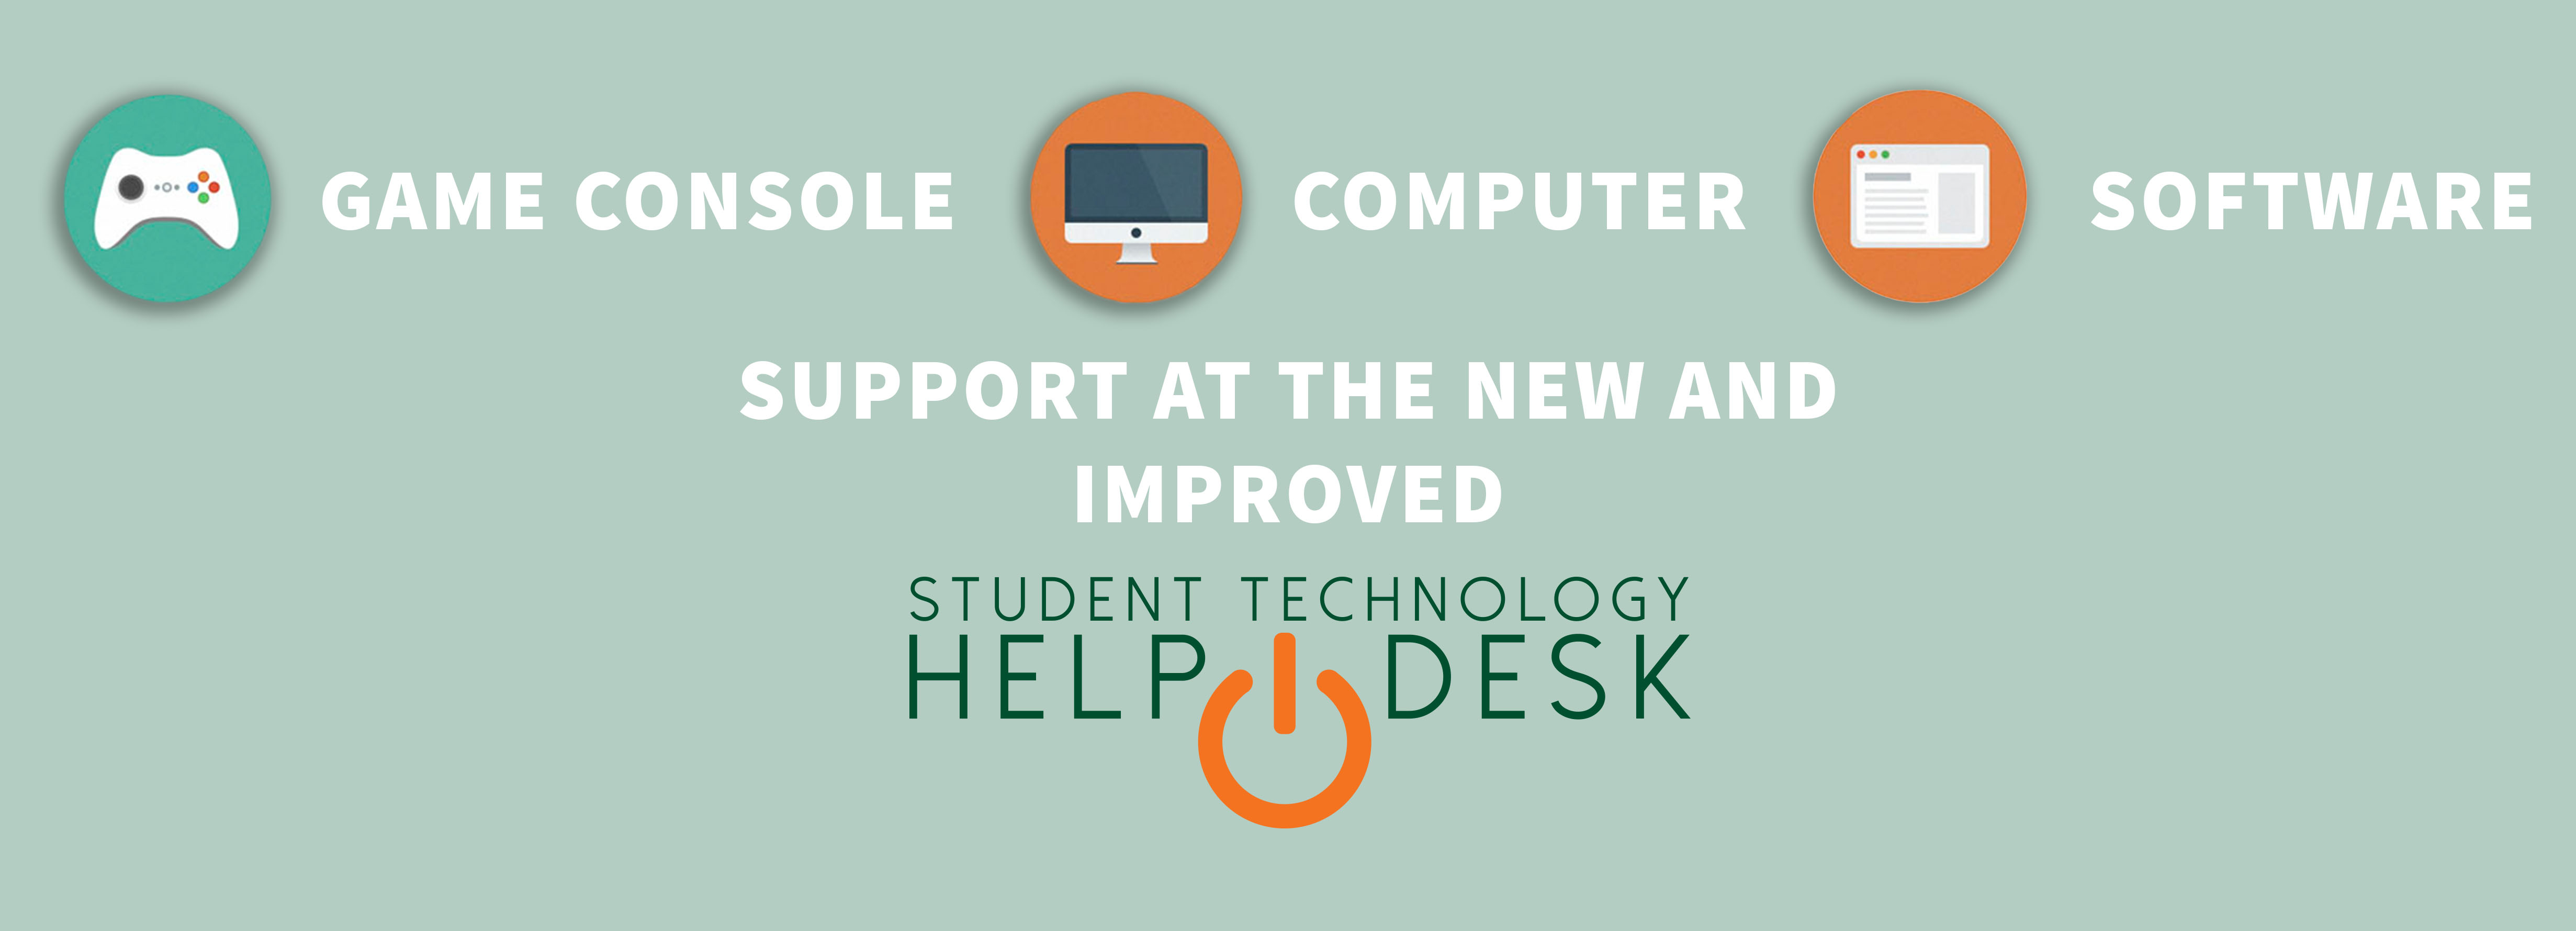 University Of Miami Information Technology – Student Support With Regard To University Of Miami Powerpoint Template